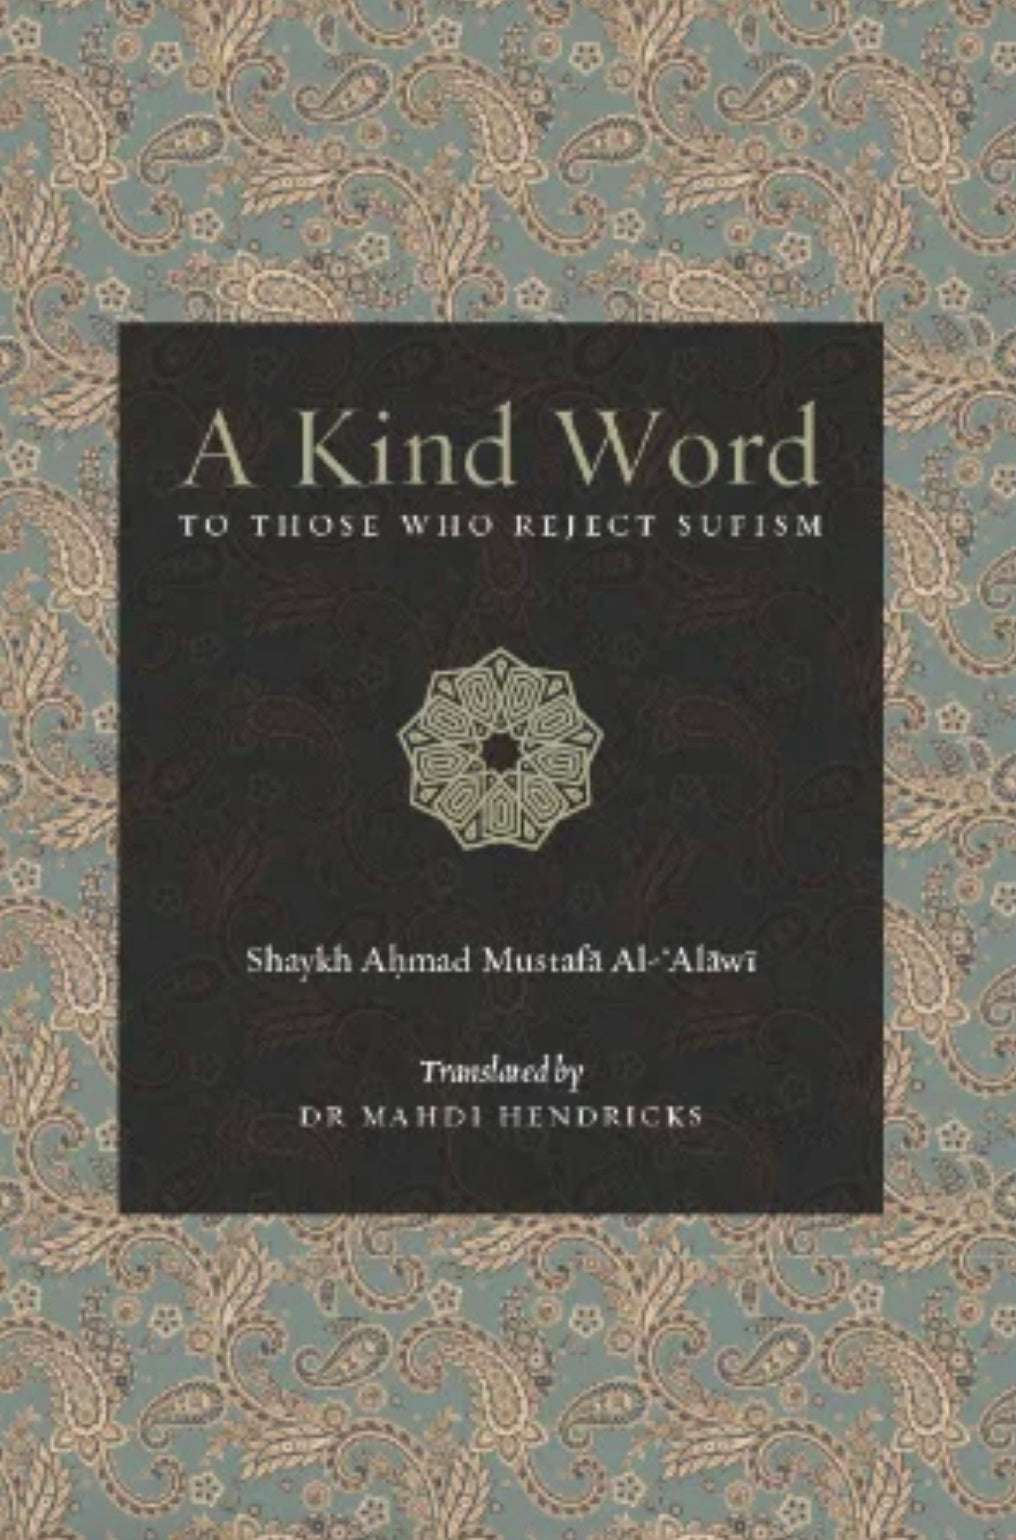 A Kind Word to Those who Reject Sufism